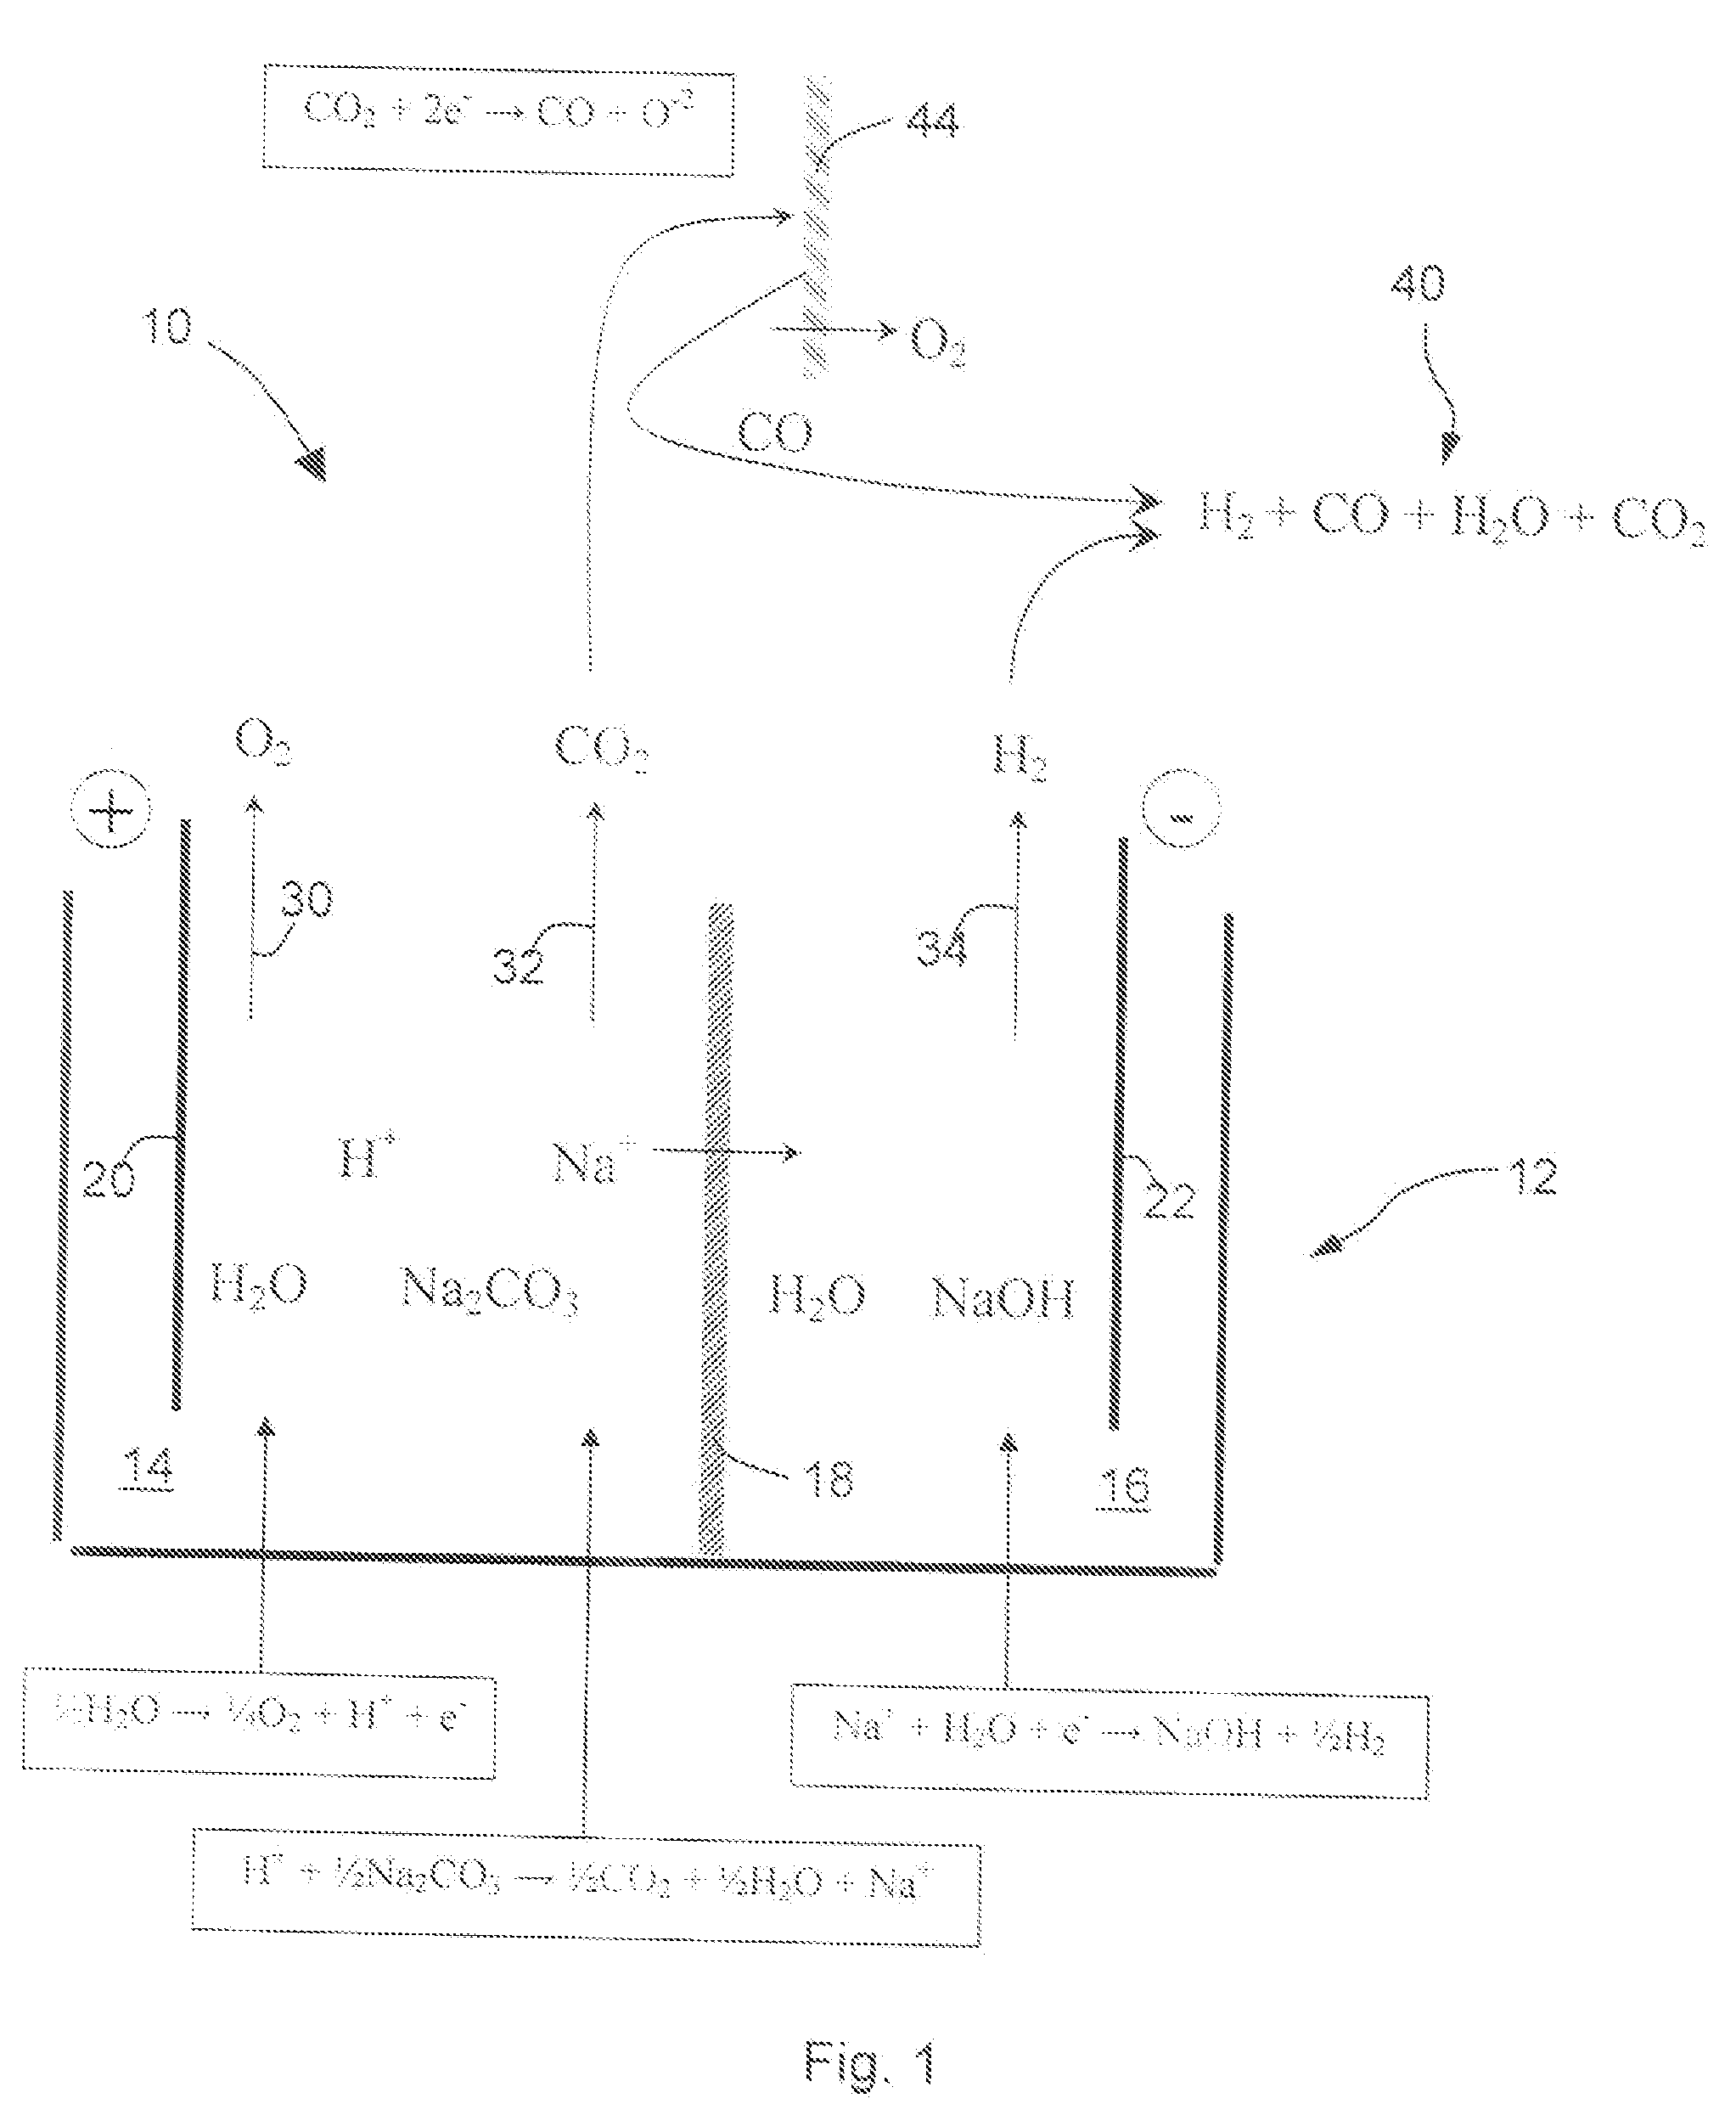 Electrochemical Cell for Production of Synthesis Gas Using Atmospheric Air and Water